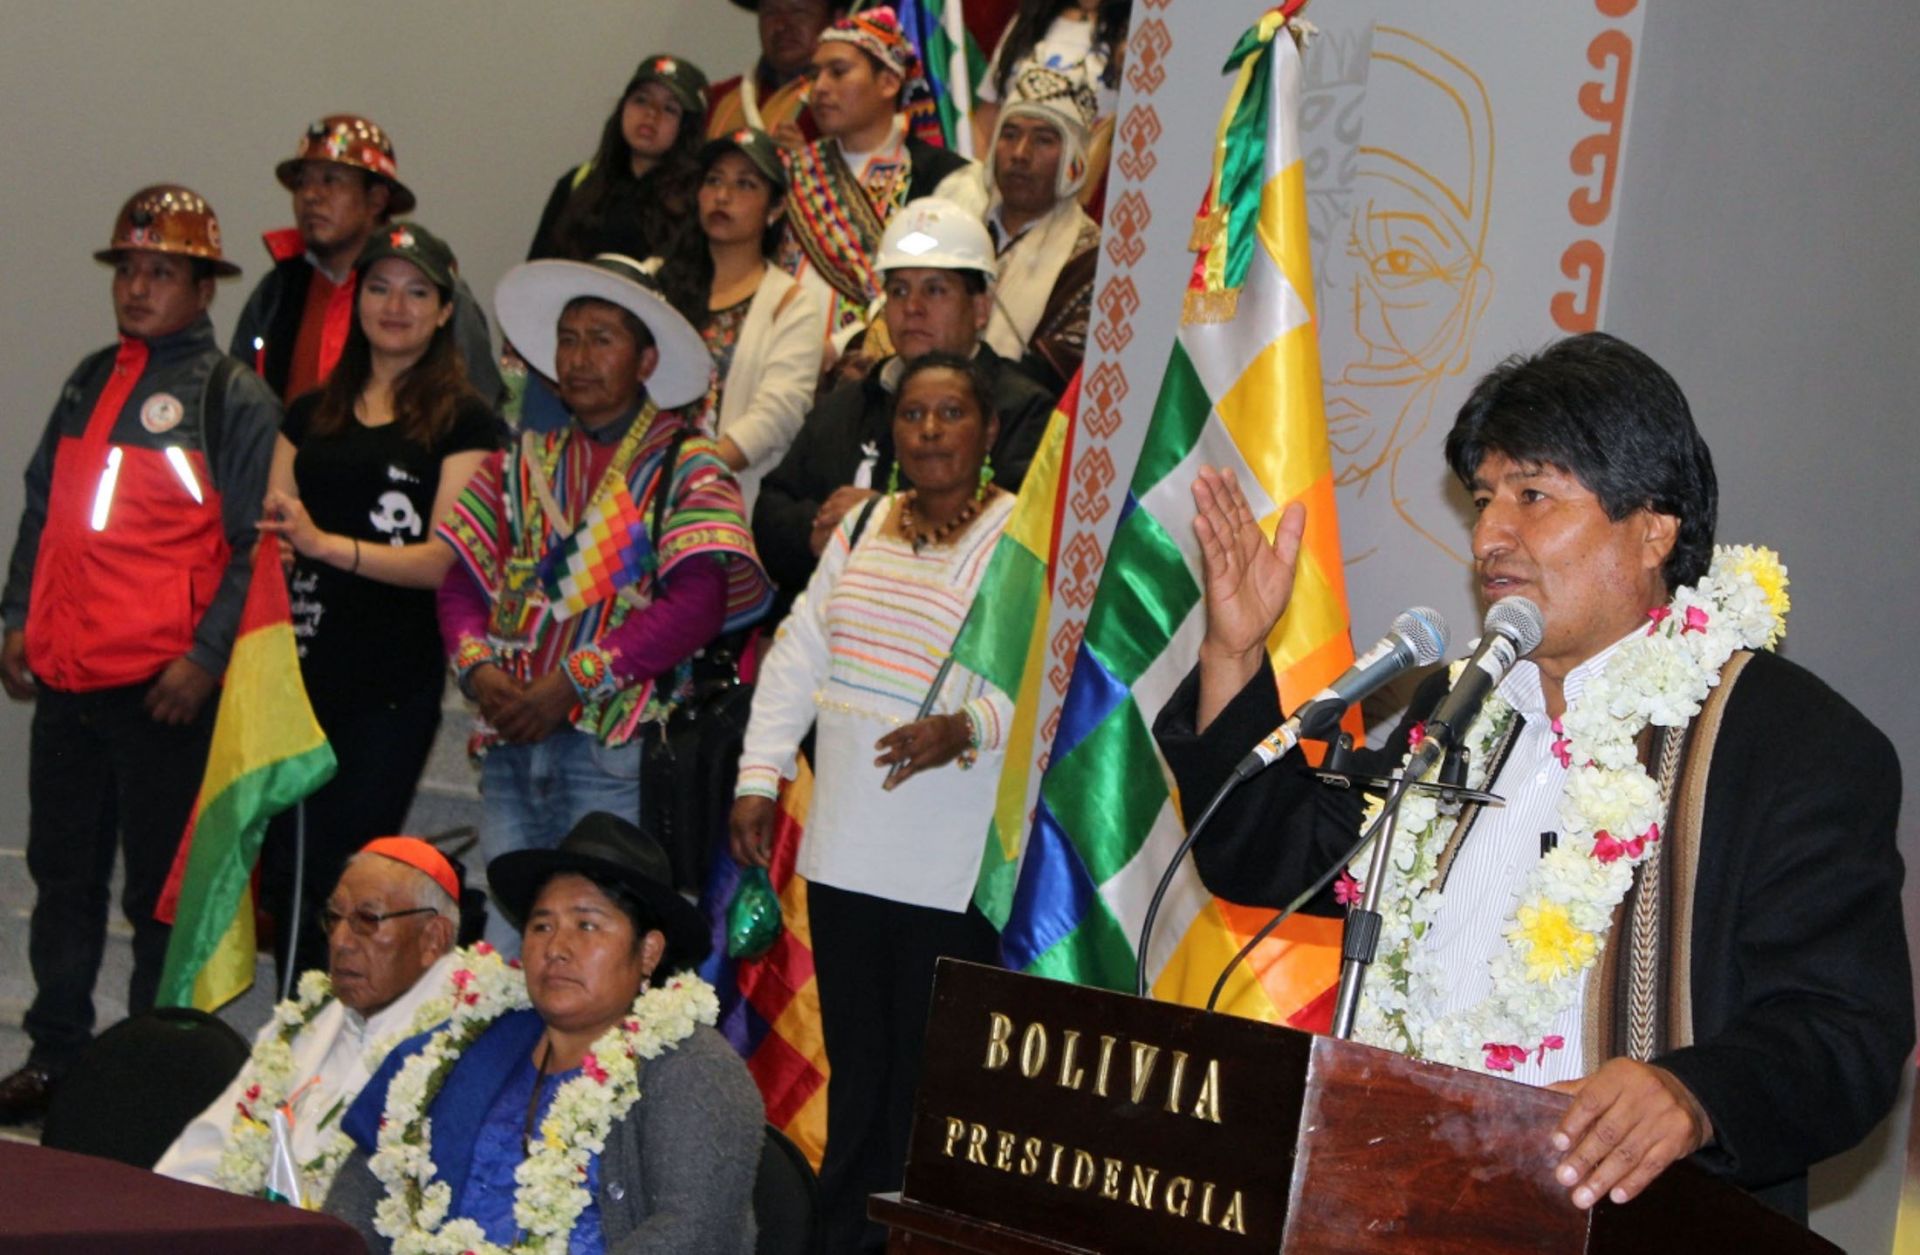 Bolivian President Evo Morales speaks during inauguration ceremonies for the new presidential palace in La Paz on Aug. 9, 2018.